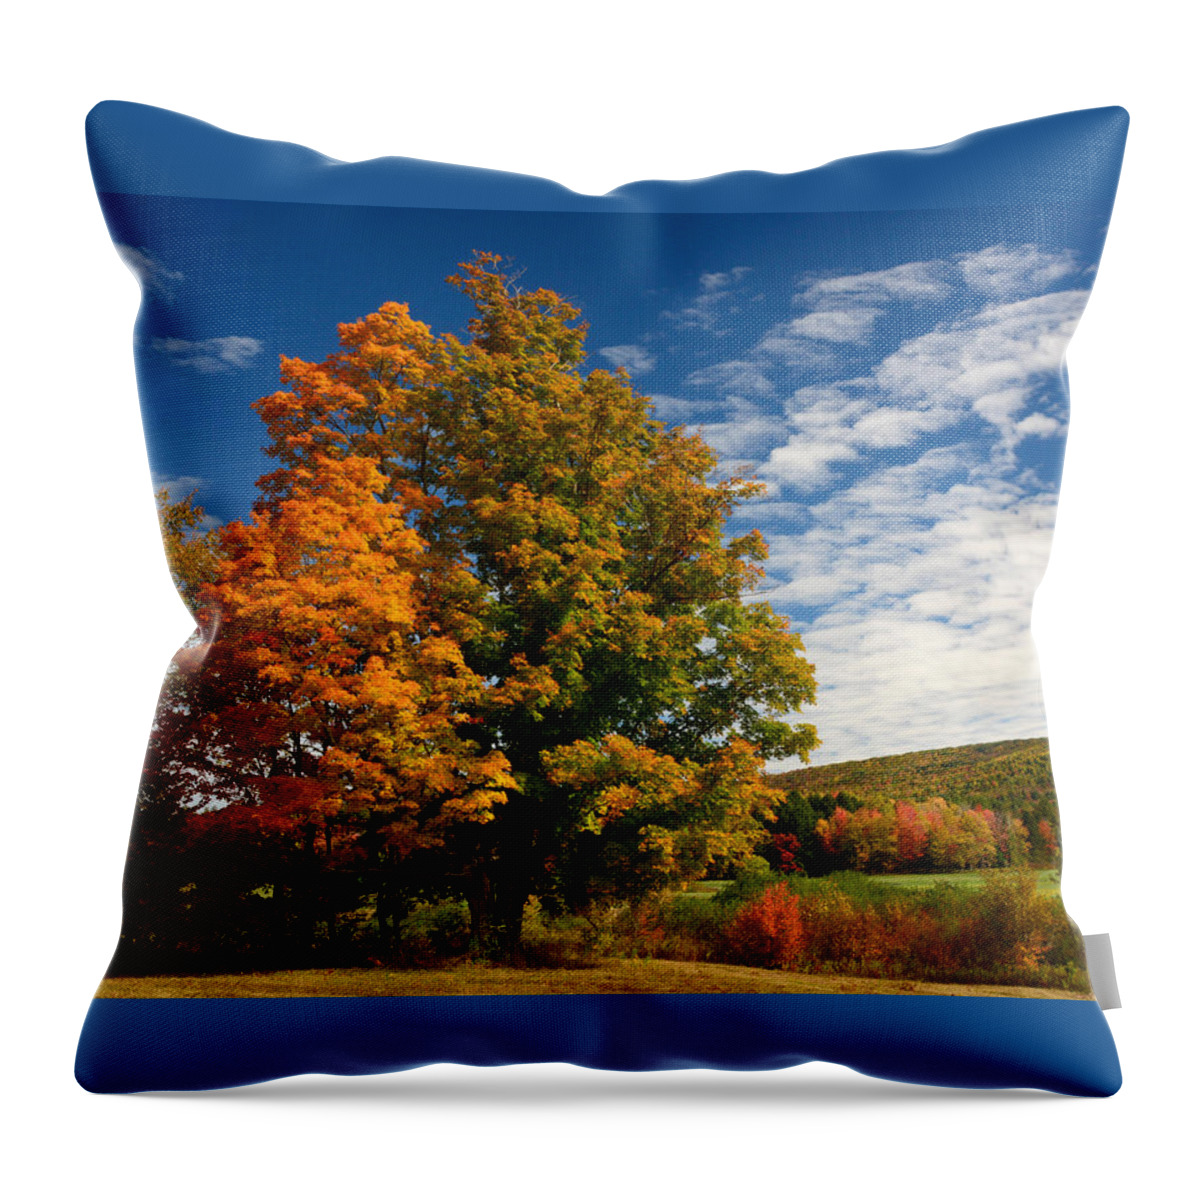 Autumn Throw Pillow featuring the photograph Autumn Tree on the Windham Path by Nancy De Flon